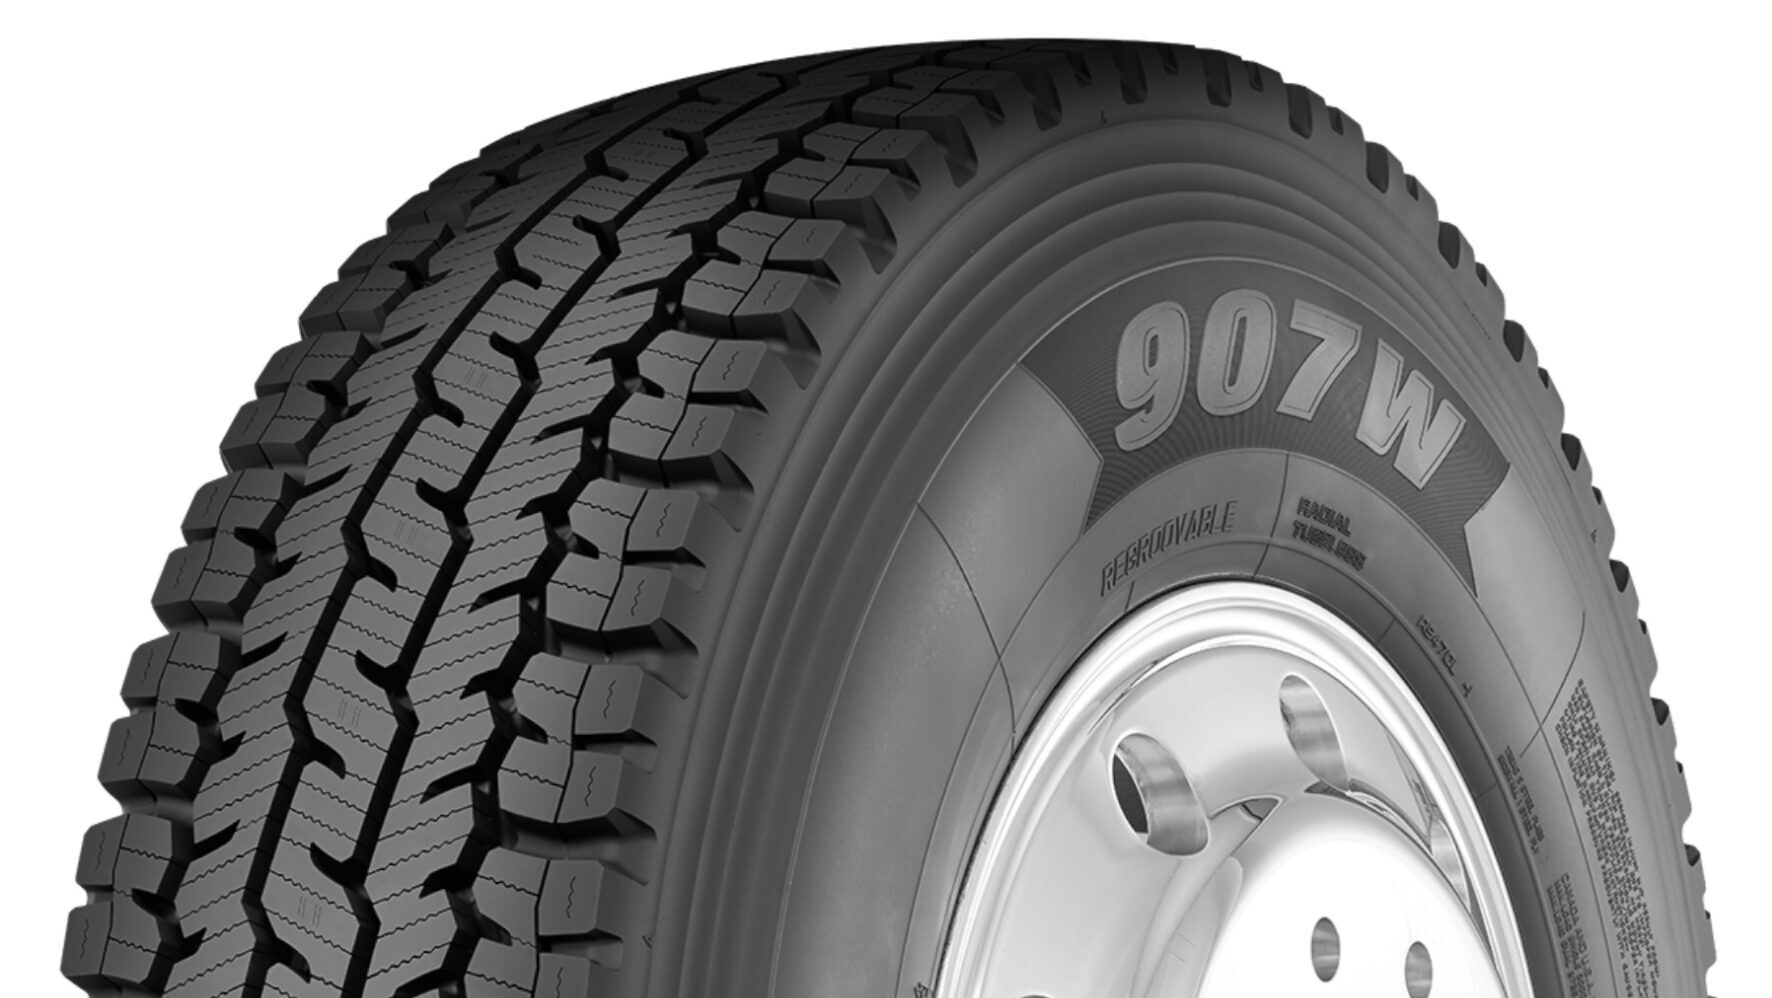 Ag tires for road travel, reduced soil compaction | OEM Off-Highway